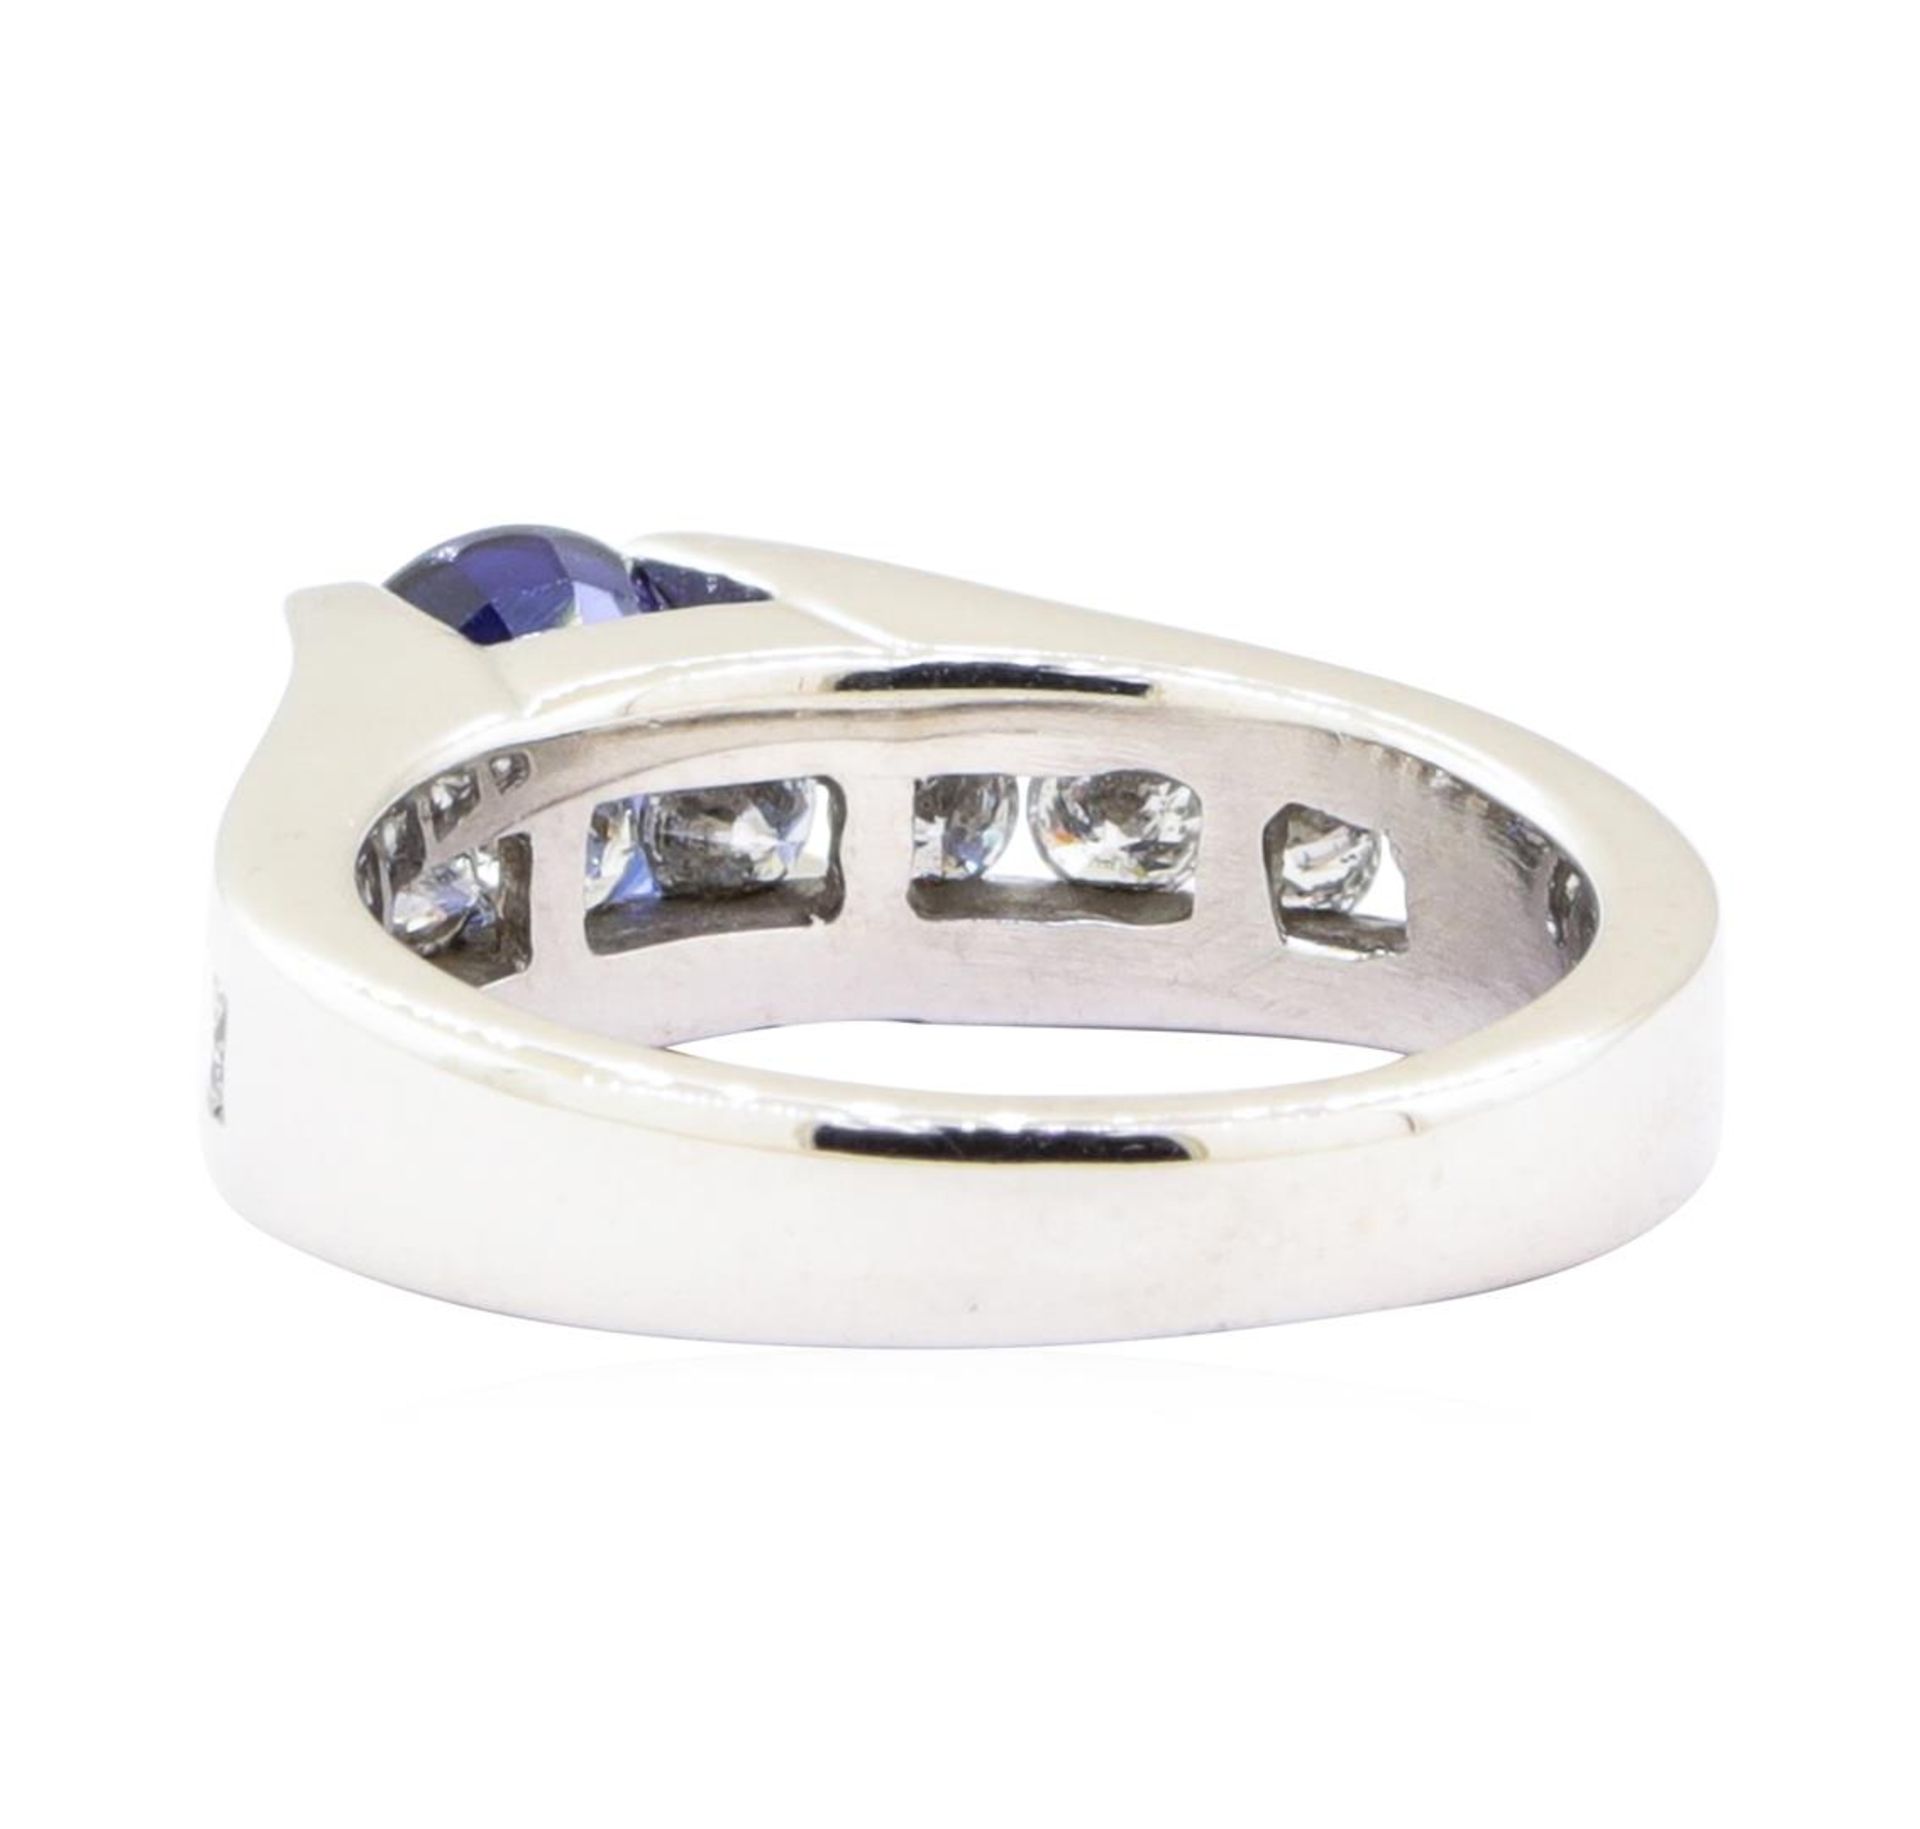 2.05ctw Sapphire and Diamond Ring - 14KT White Gold - Image 3 of 4